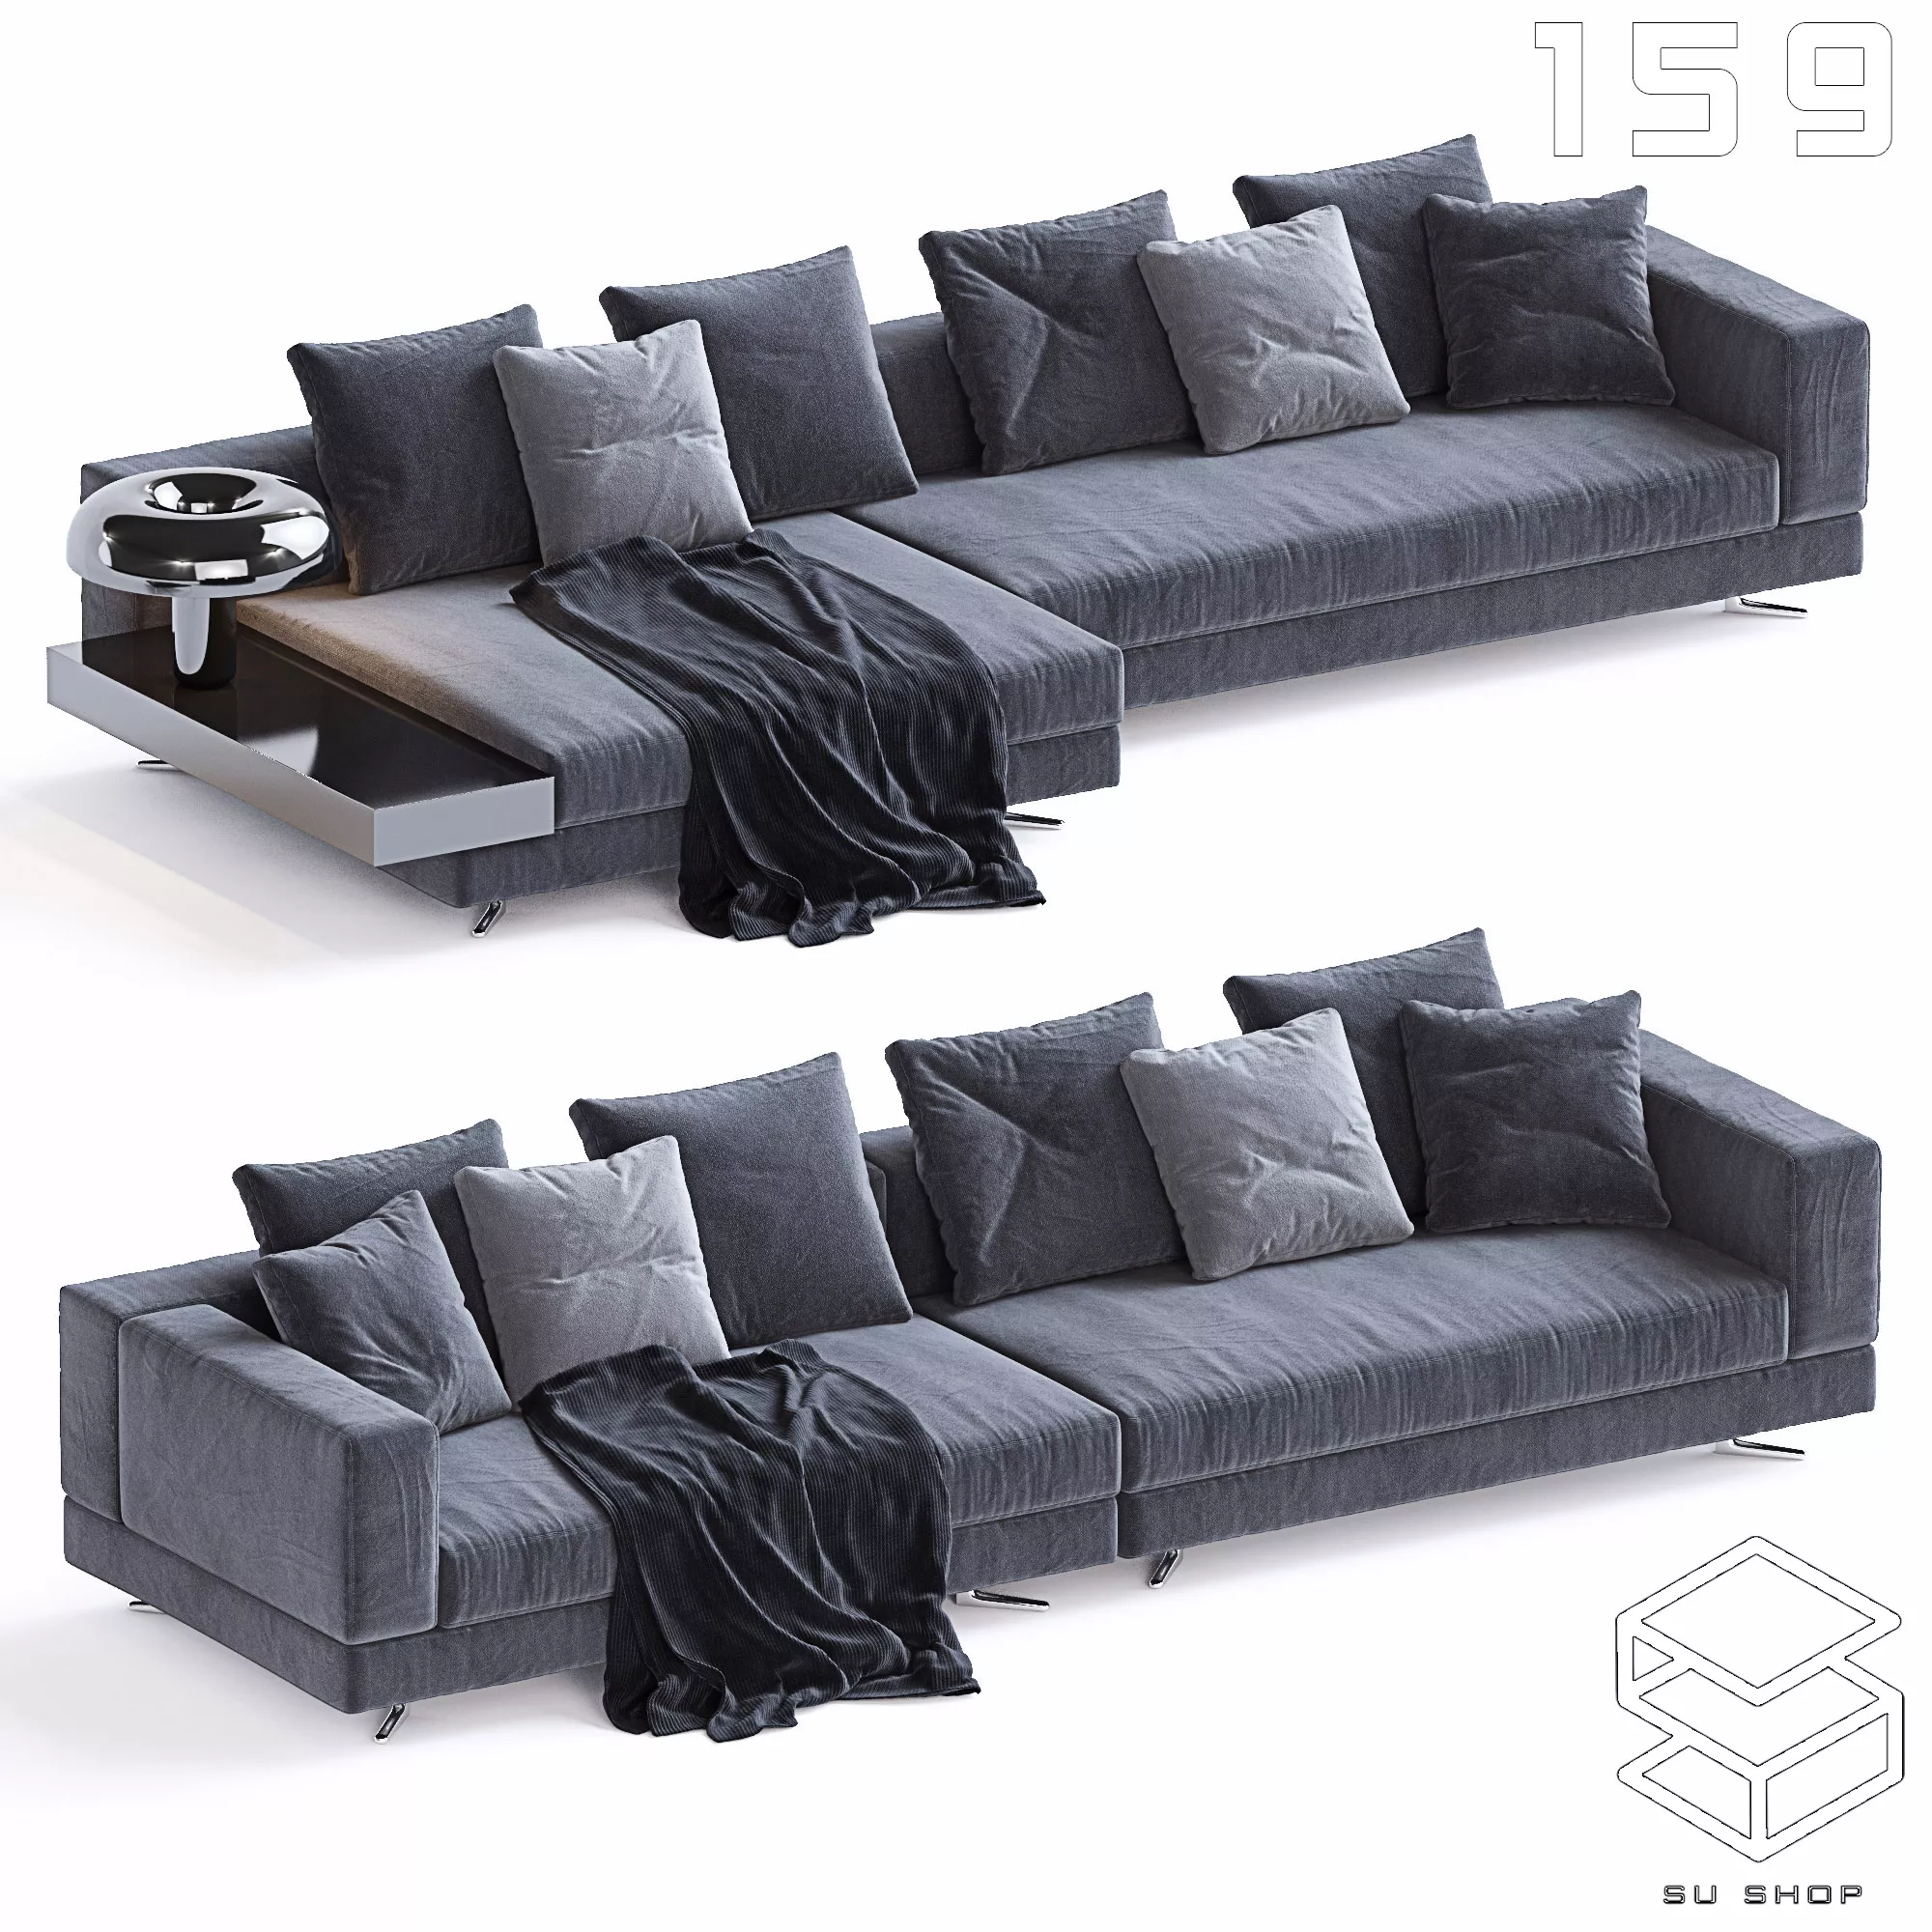 MODERN SOFA - SKETCHUP 3D MODEL - VRAY OR ENSCAPE - ID13451